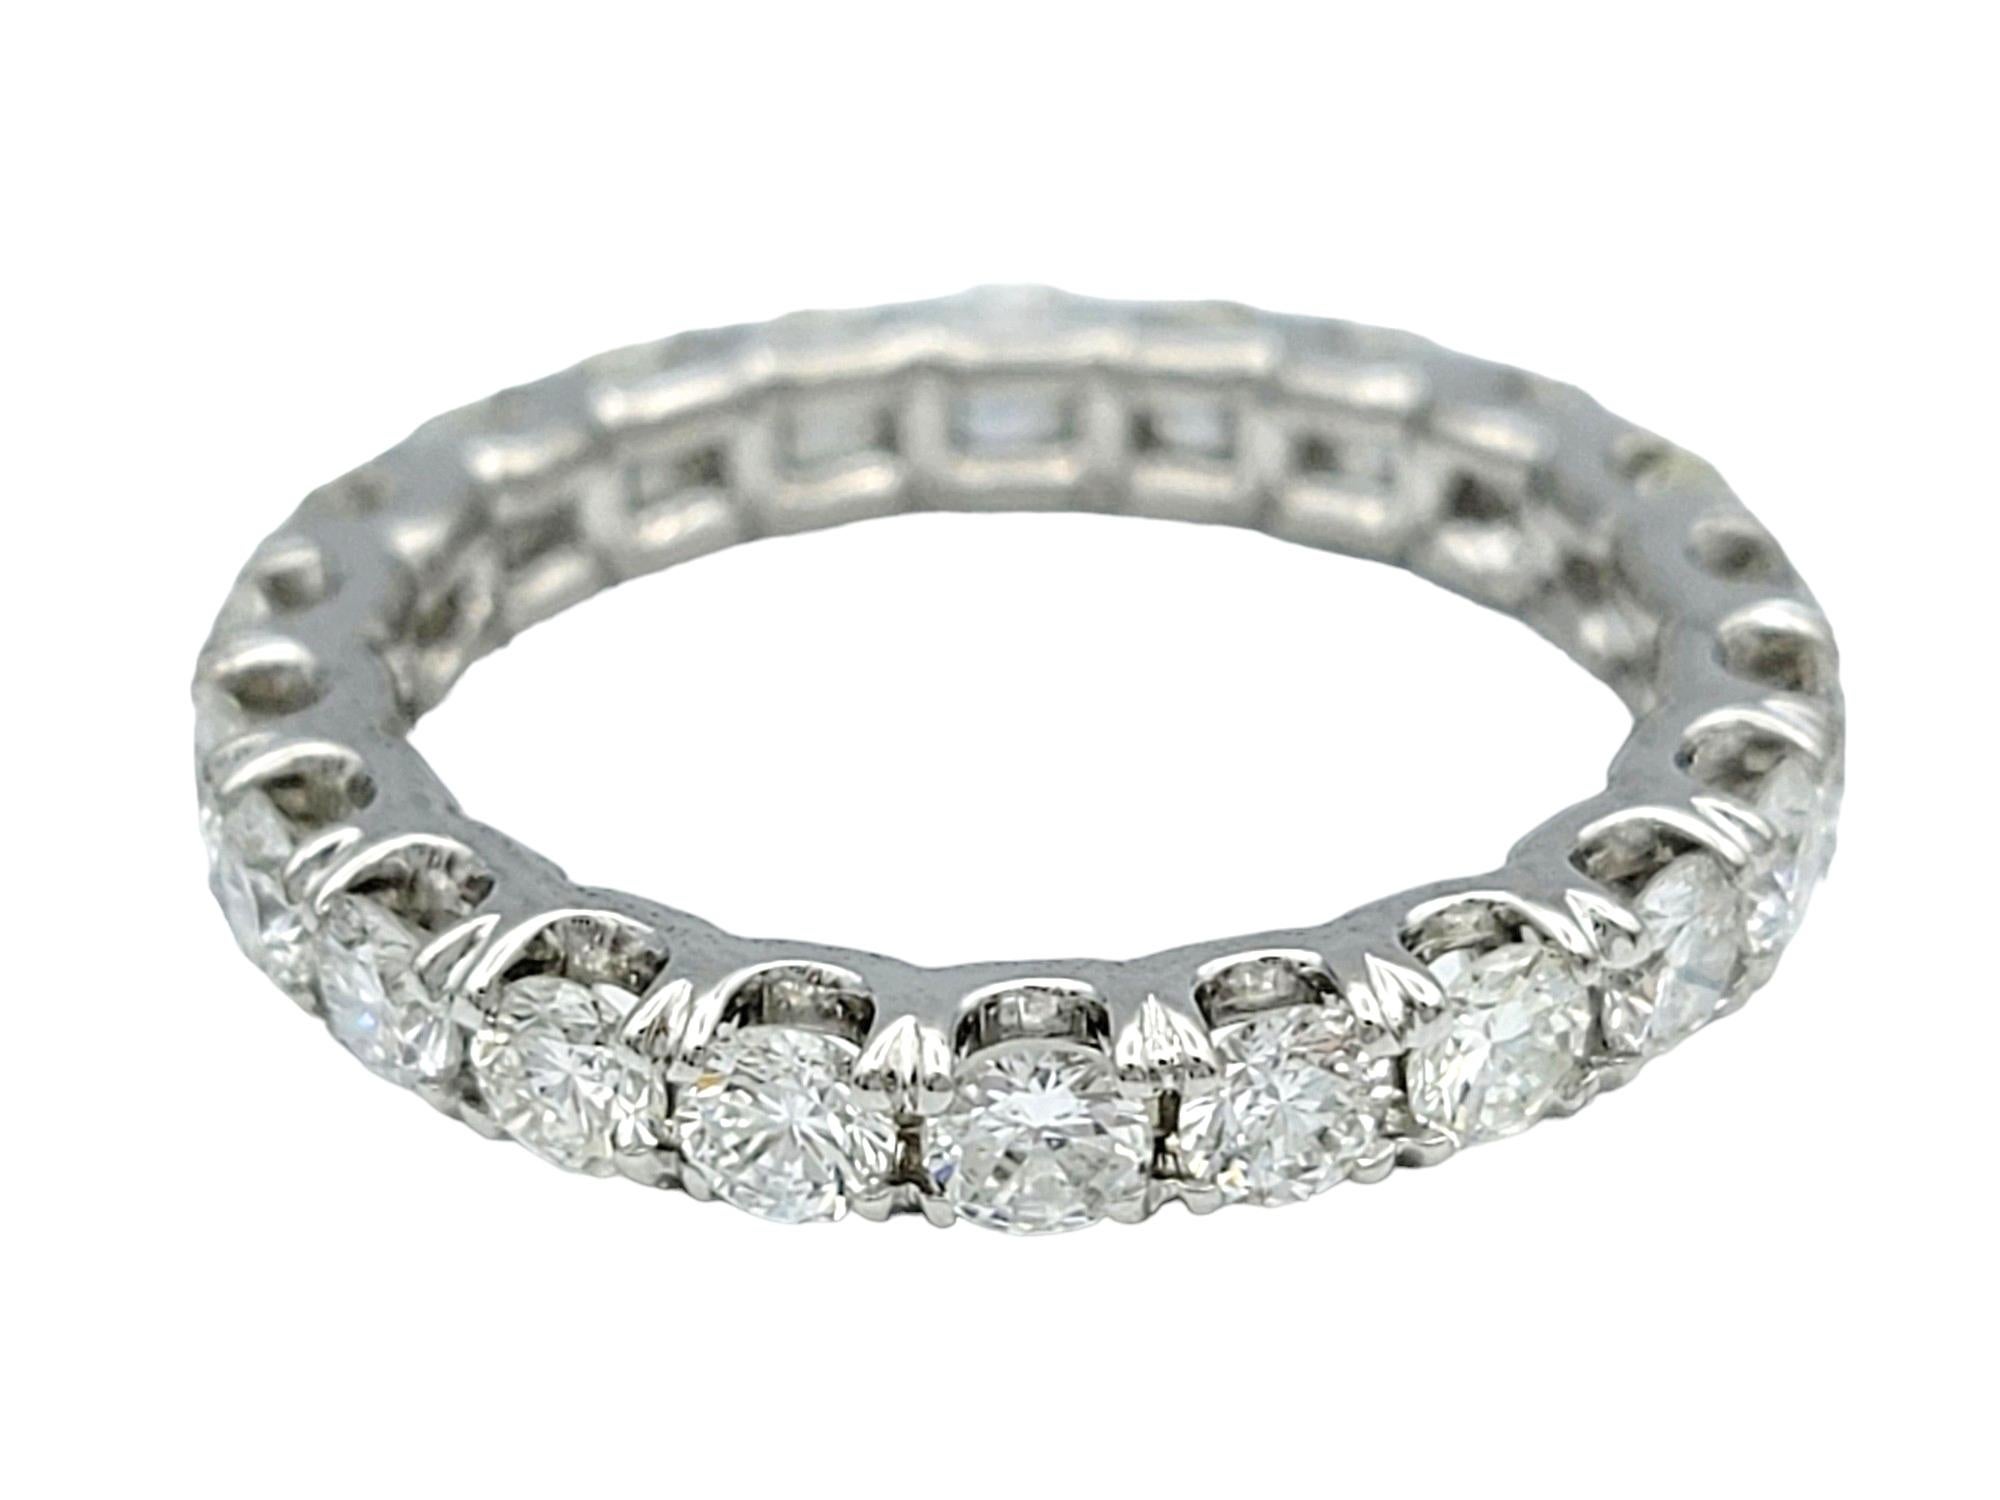 Contemporary 2.20 Carat Round Diamond Eternity Band Ring in 18 Karat White Gold, F-G / VS2 For Sale